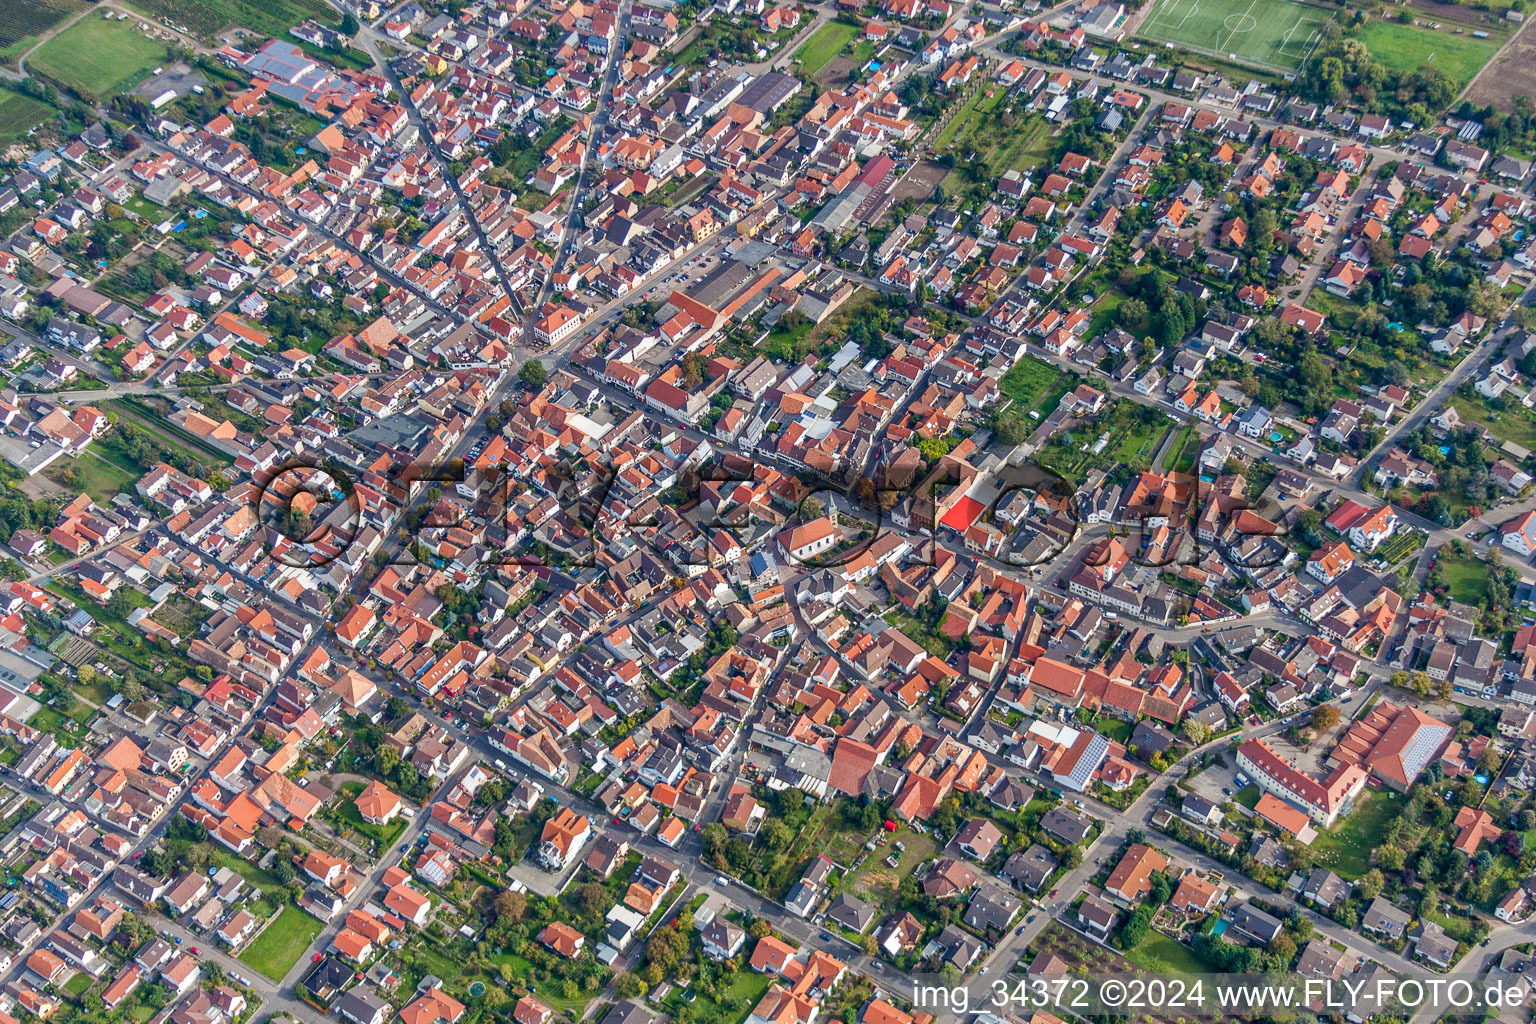 Aerial view of Town View of the streets and houses of the residential areas in Weisenheim am Sand in the state Rhineland-Palatinate, Germany